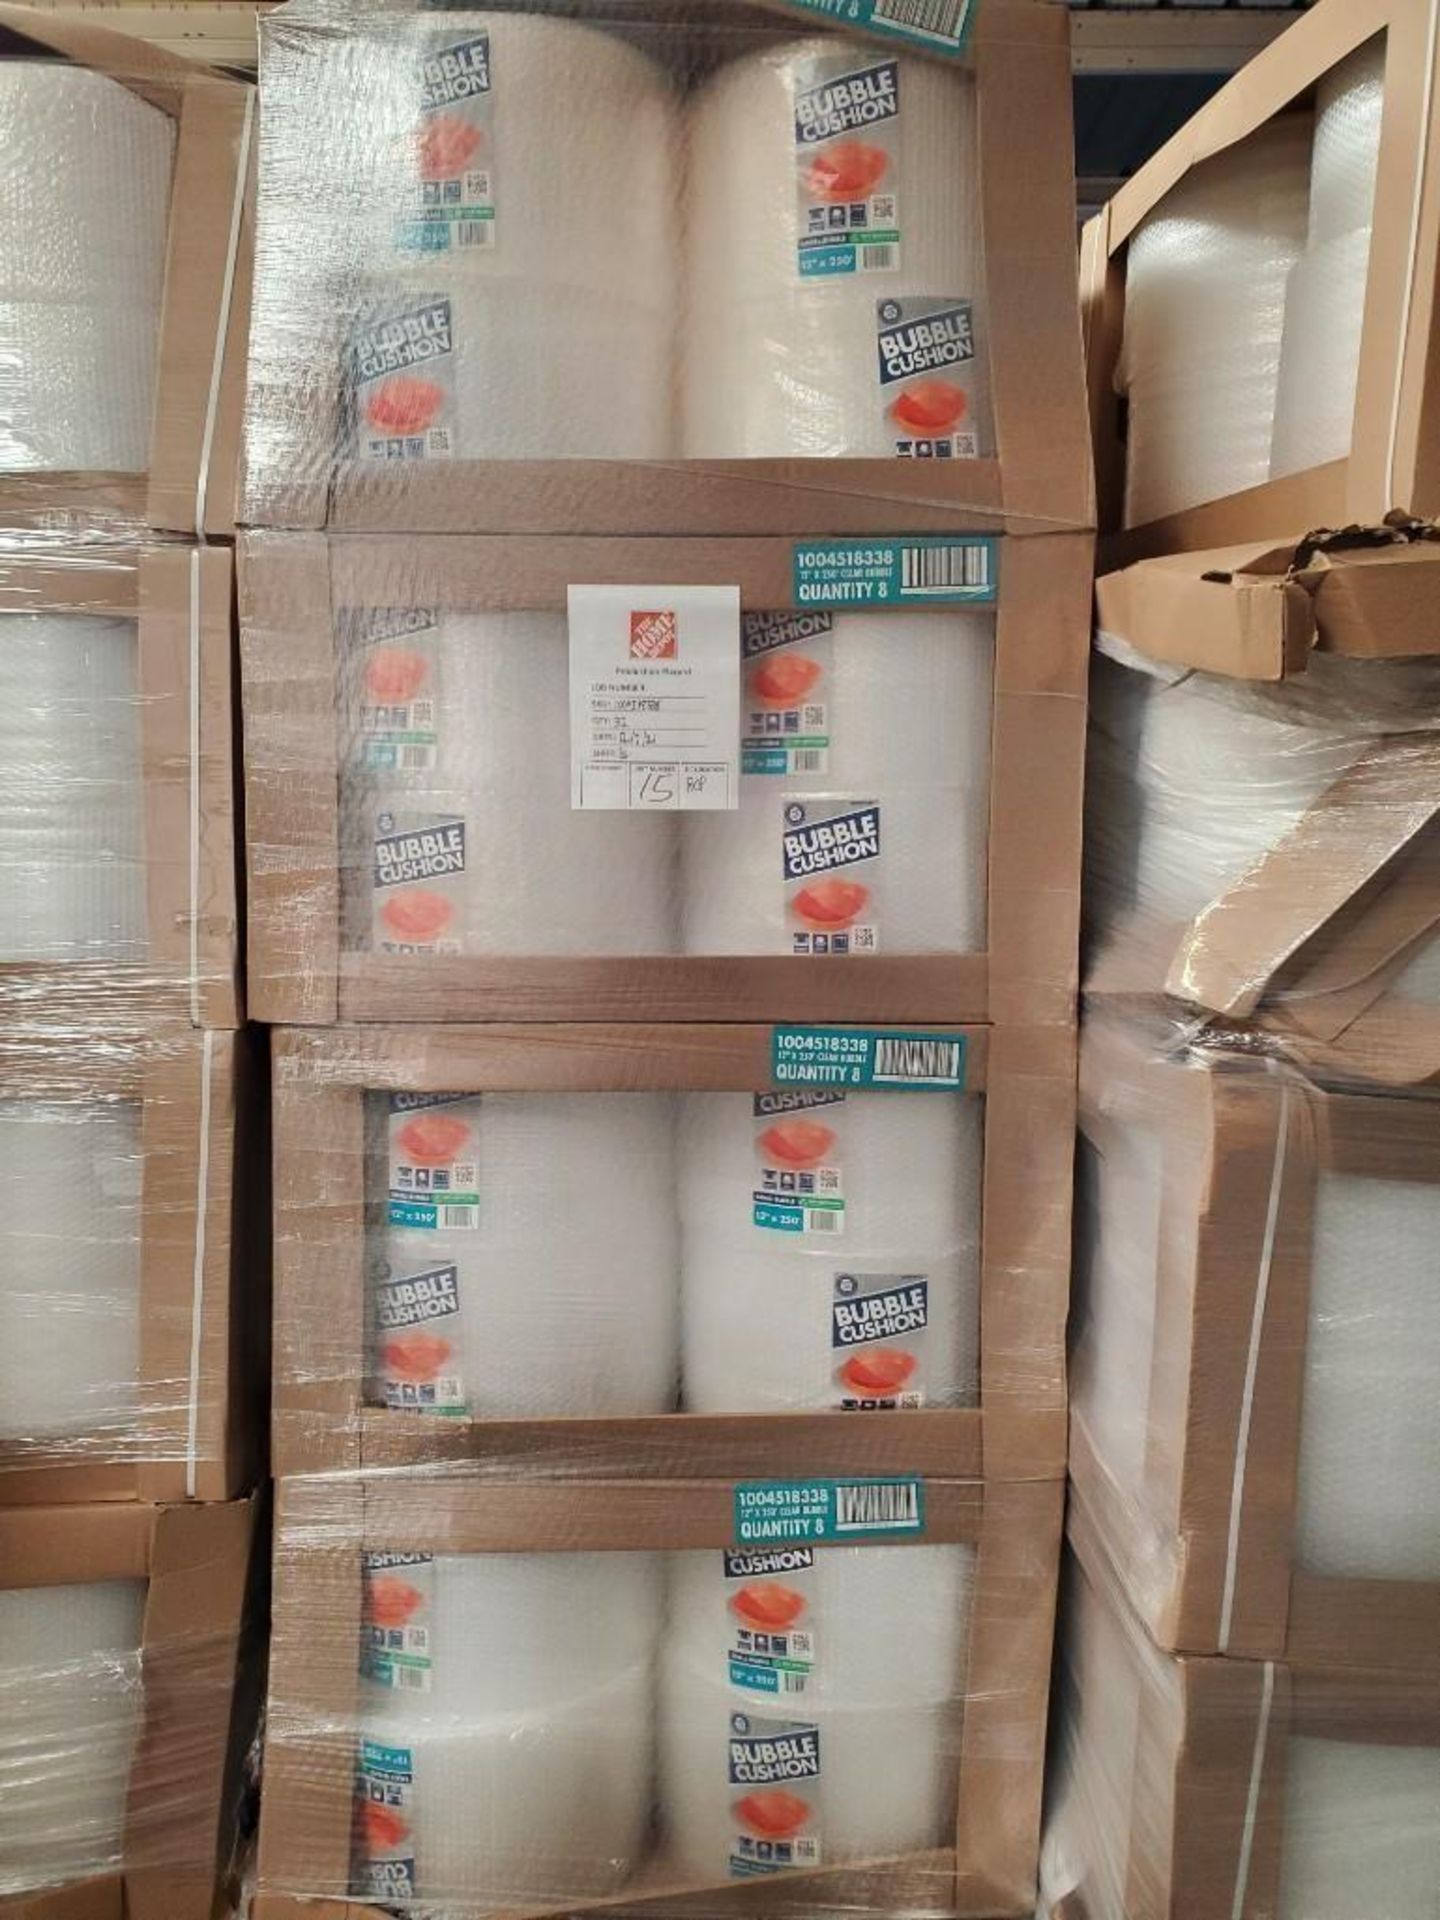 ONE SKID/STACK OF BUBBLE WRAP, 250' X 12" X 3/16", 32 ROLLS PER PALLET - Image 2 of 4